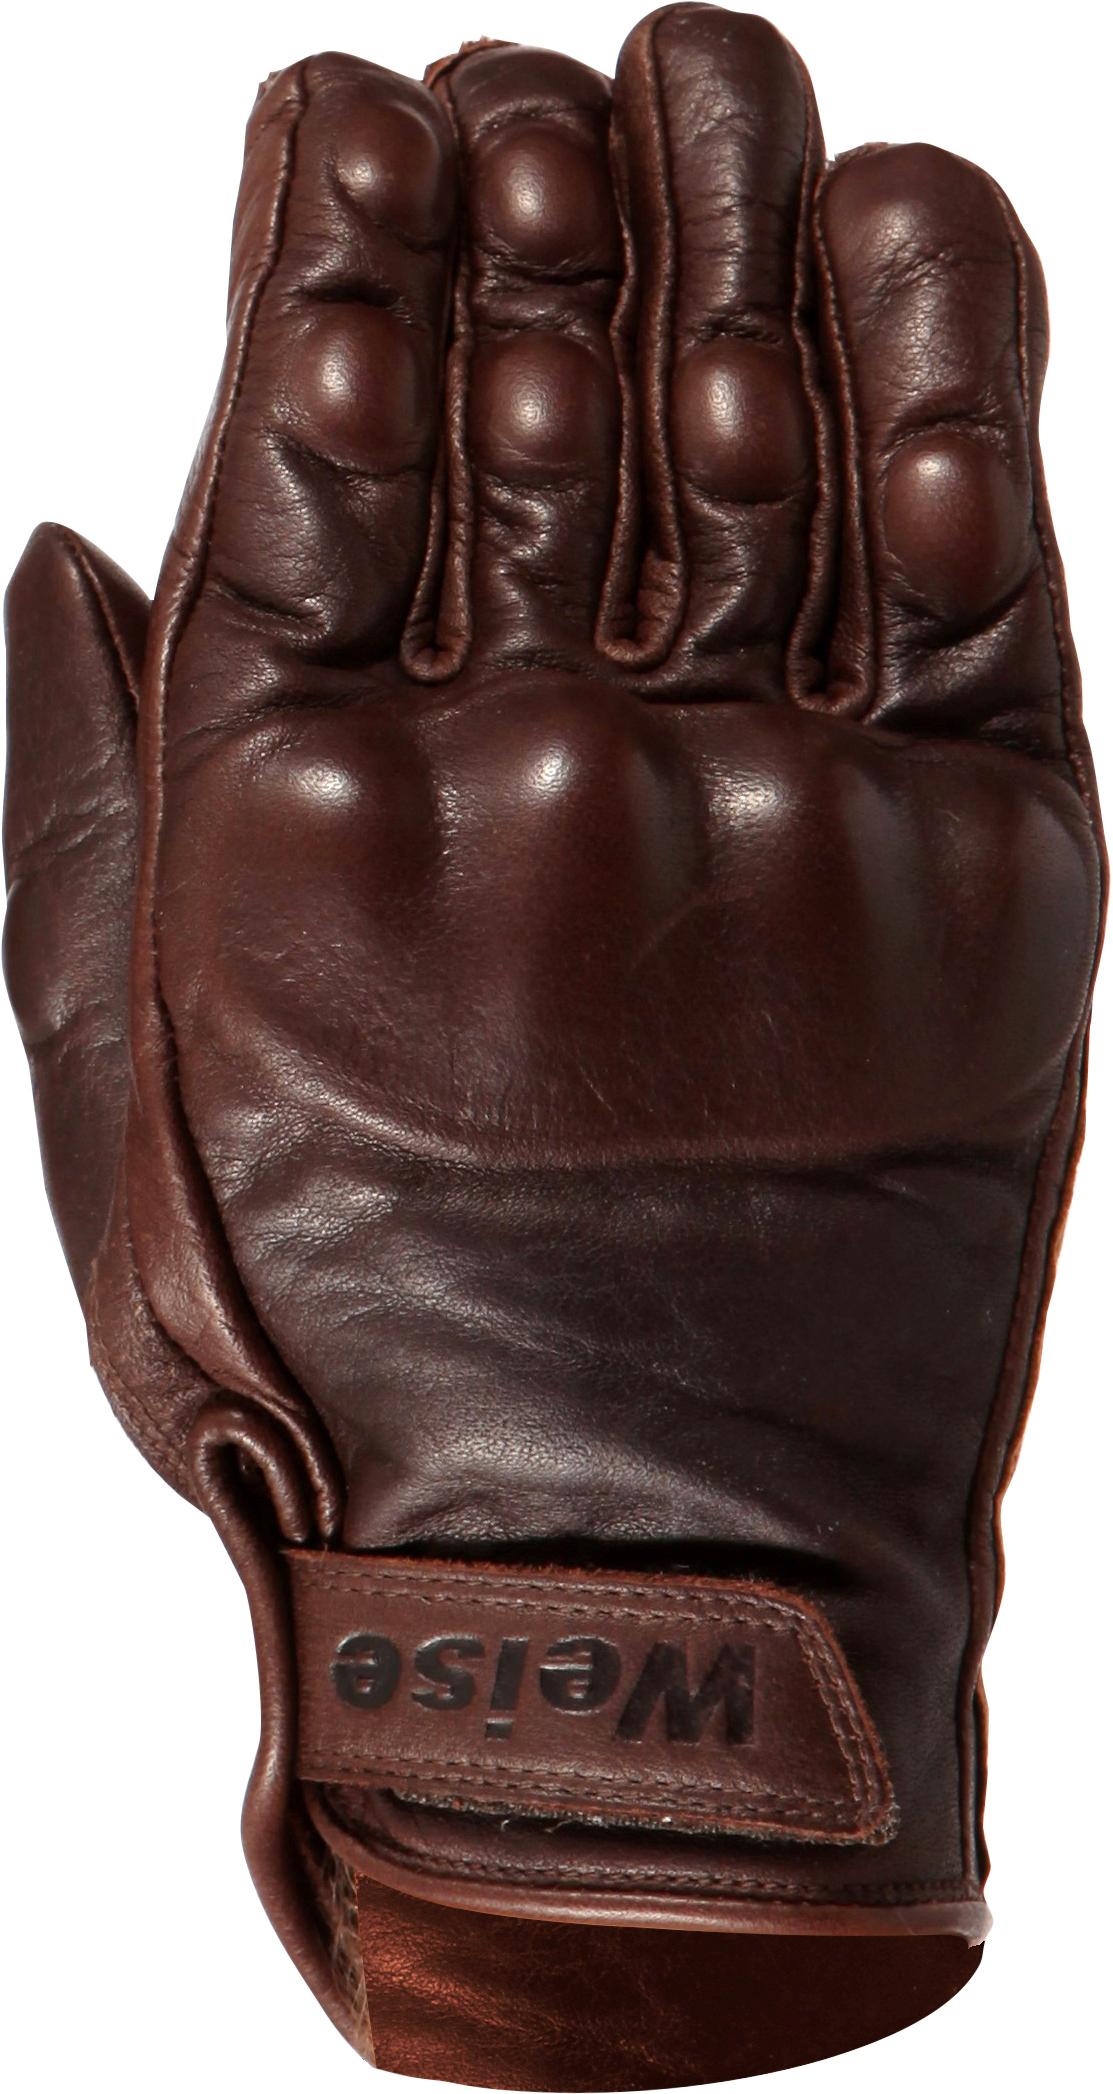 Weise Victory Gloves Brown Small